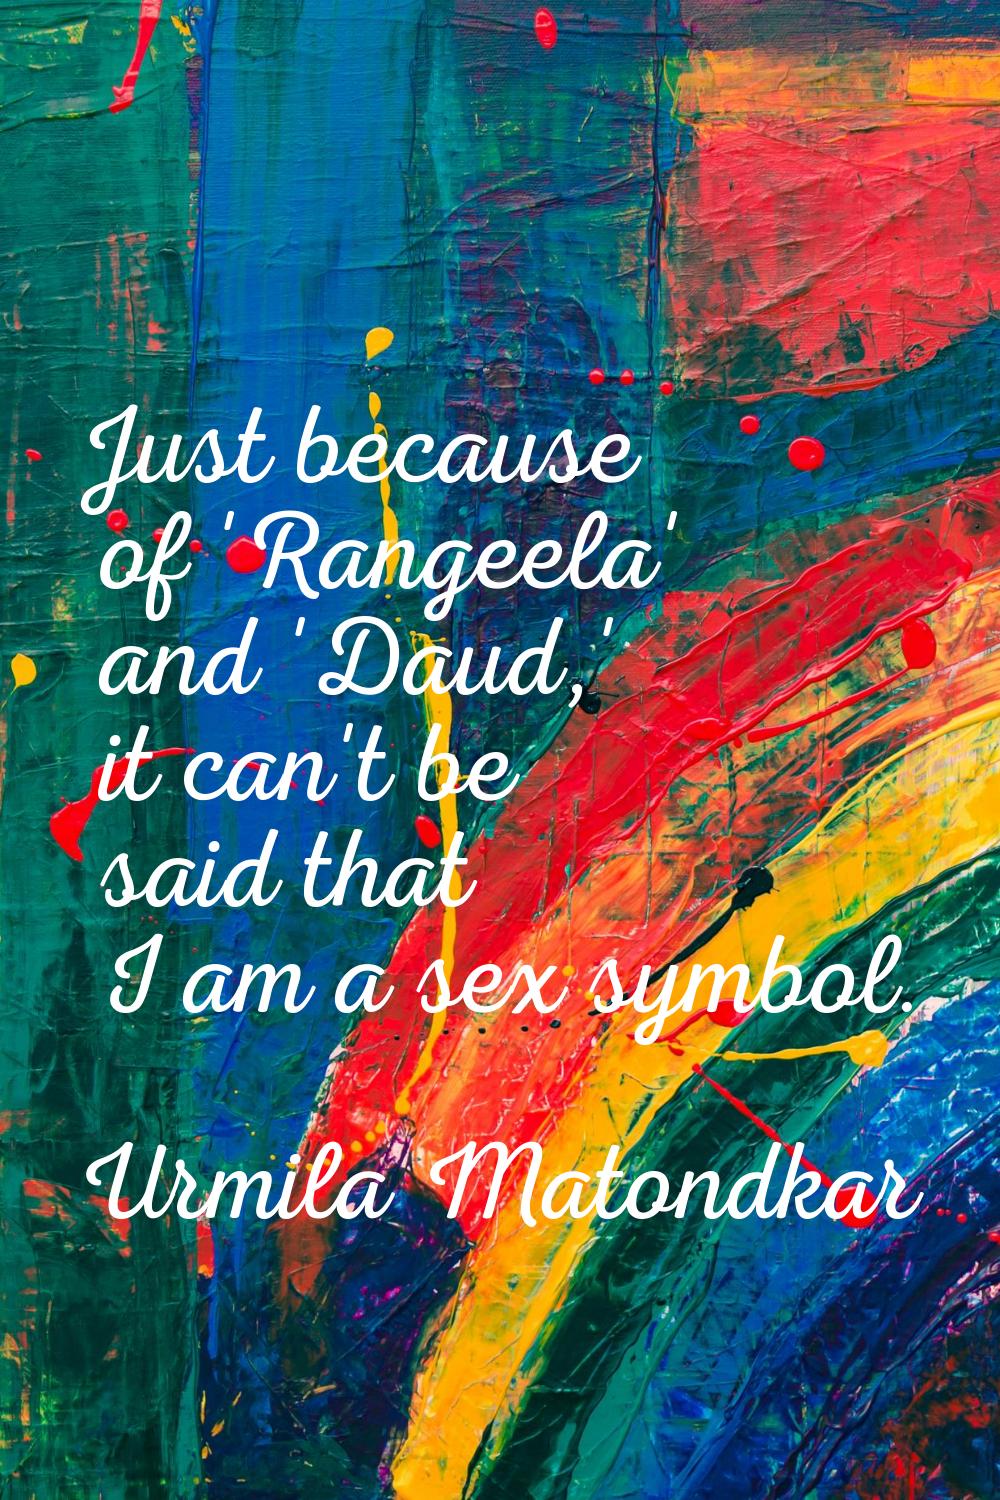 Just because of 'Rangeela' and 'Daud,' it can't be said that I am a sex symbol.